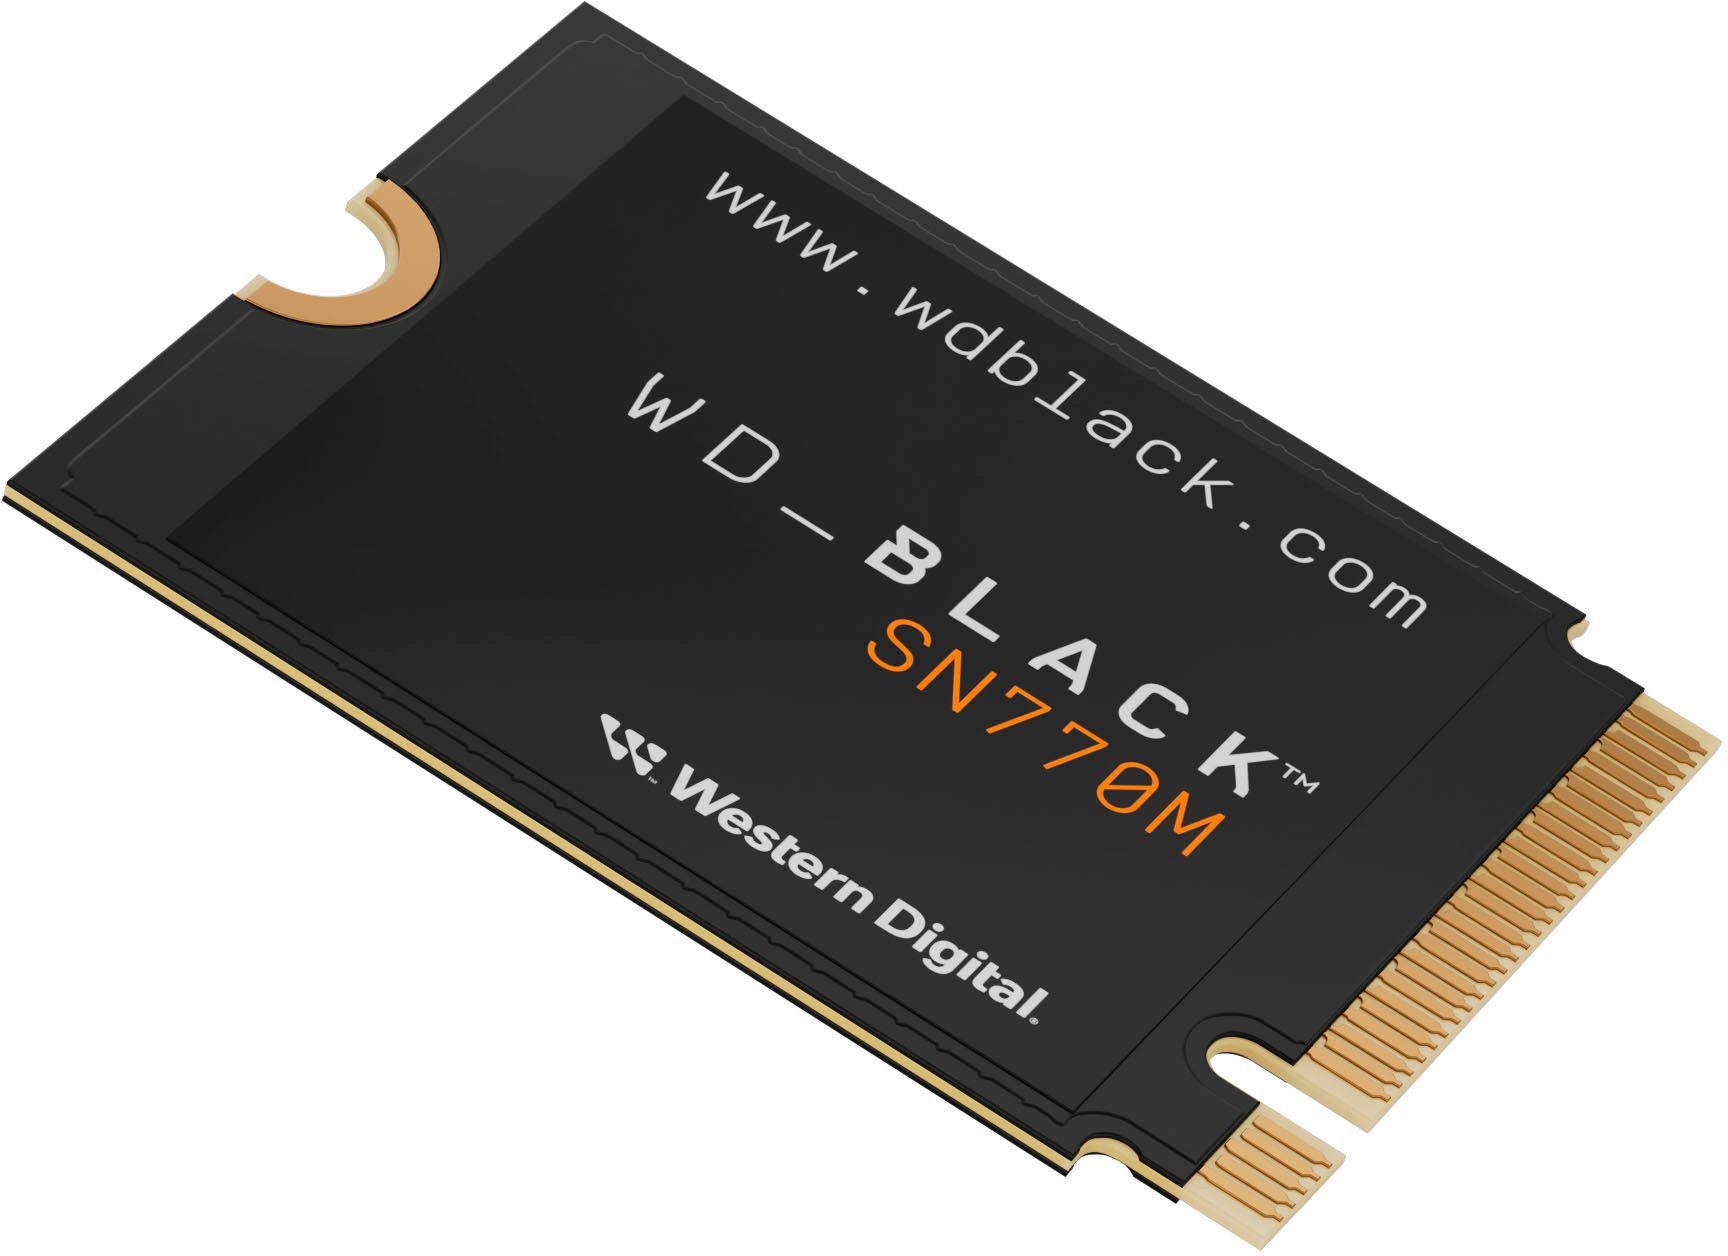  Buy Western Digital WD Black SN770 NVMe 500GB, Upto 5000MB/s, 5Y  Warranty, PCIe Gen 3 NVMe M.2 (2280), Gaming Storage, Internal Solid State  Drive (SSD) (WDS500G3X0E) Online at Low Prices in